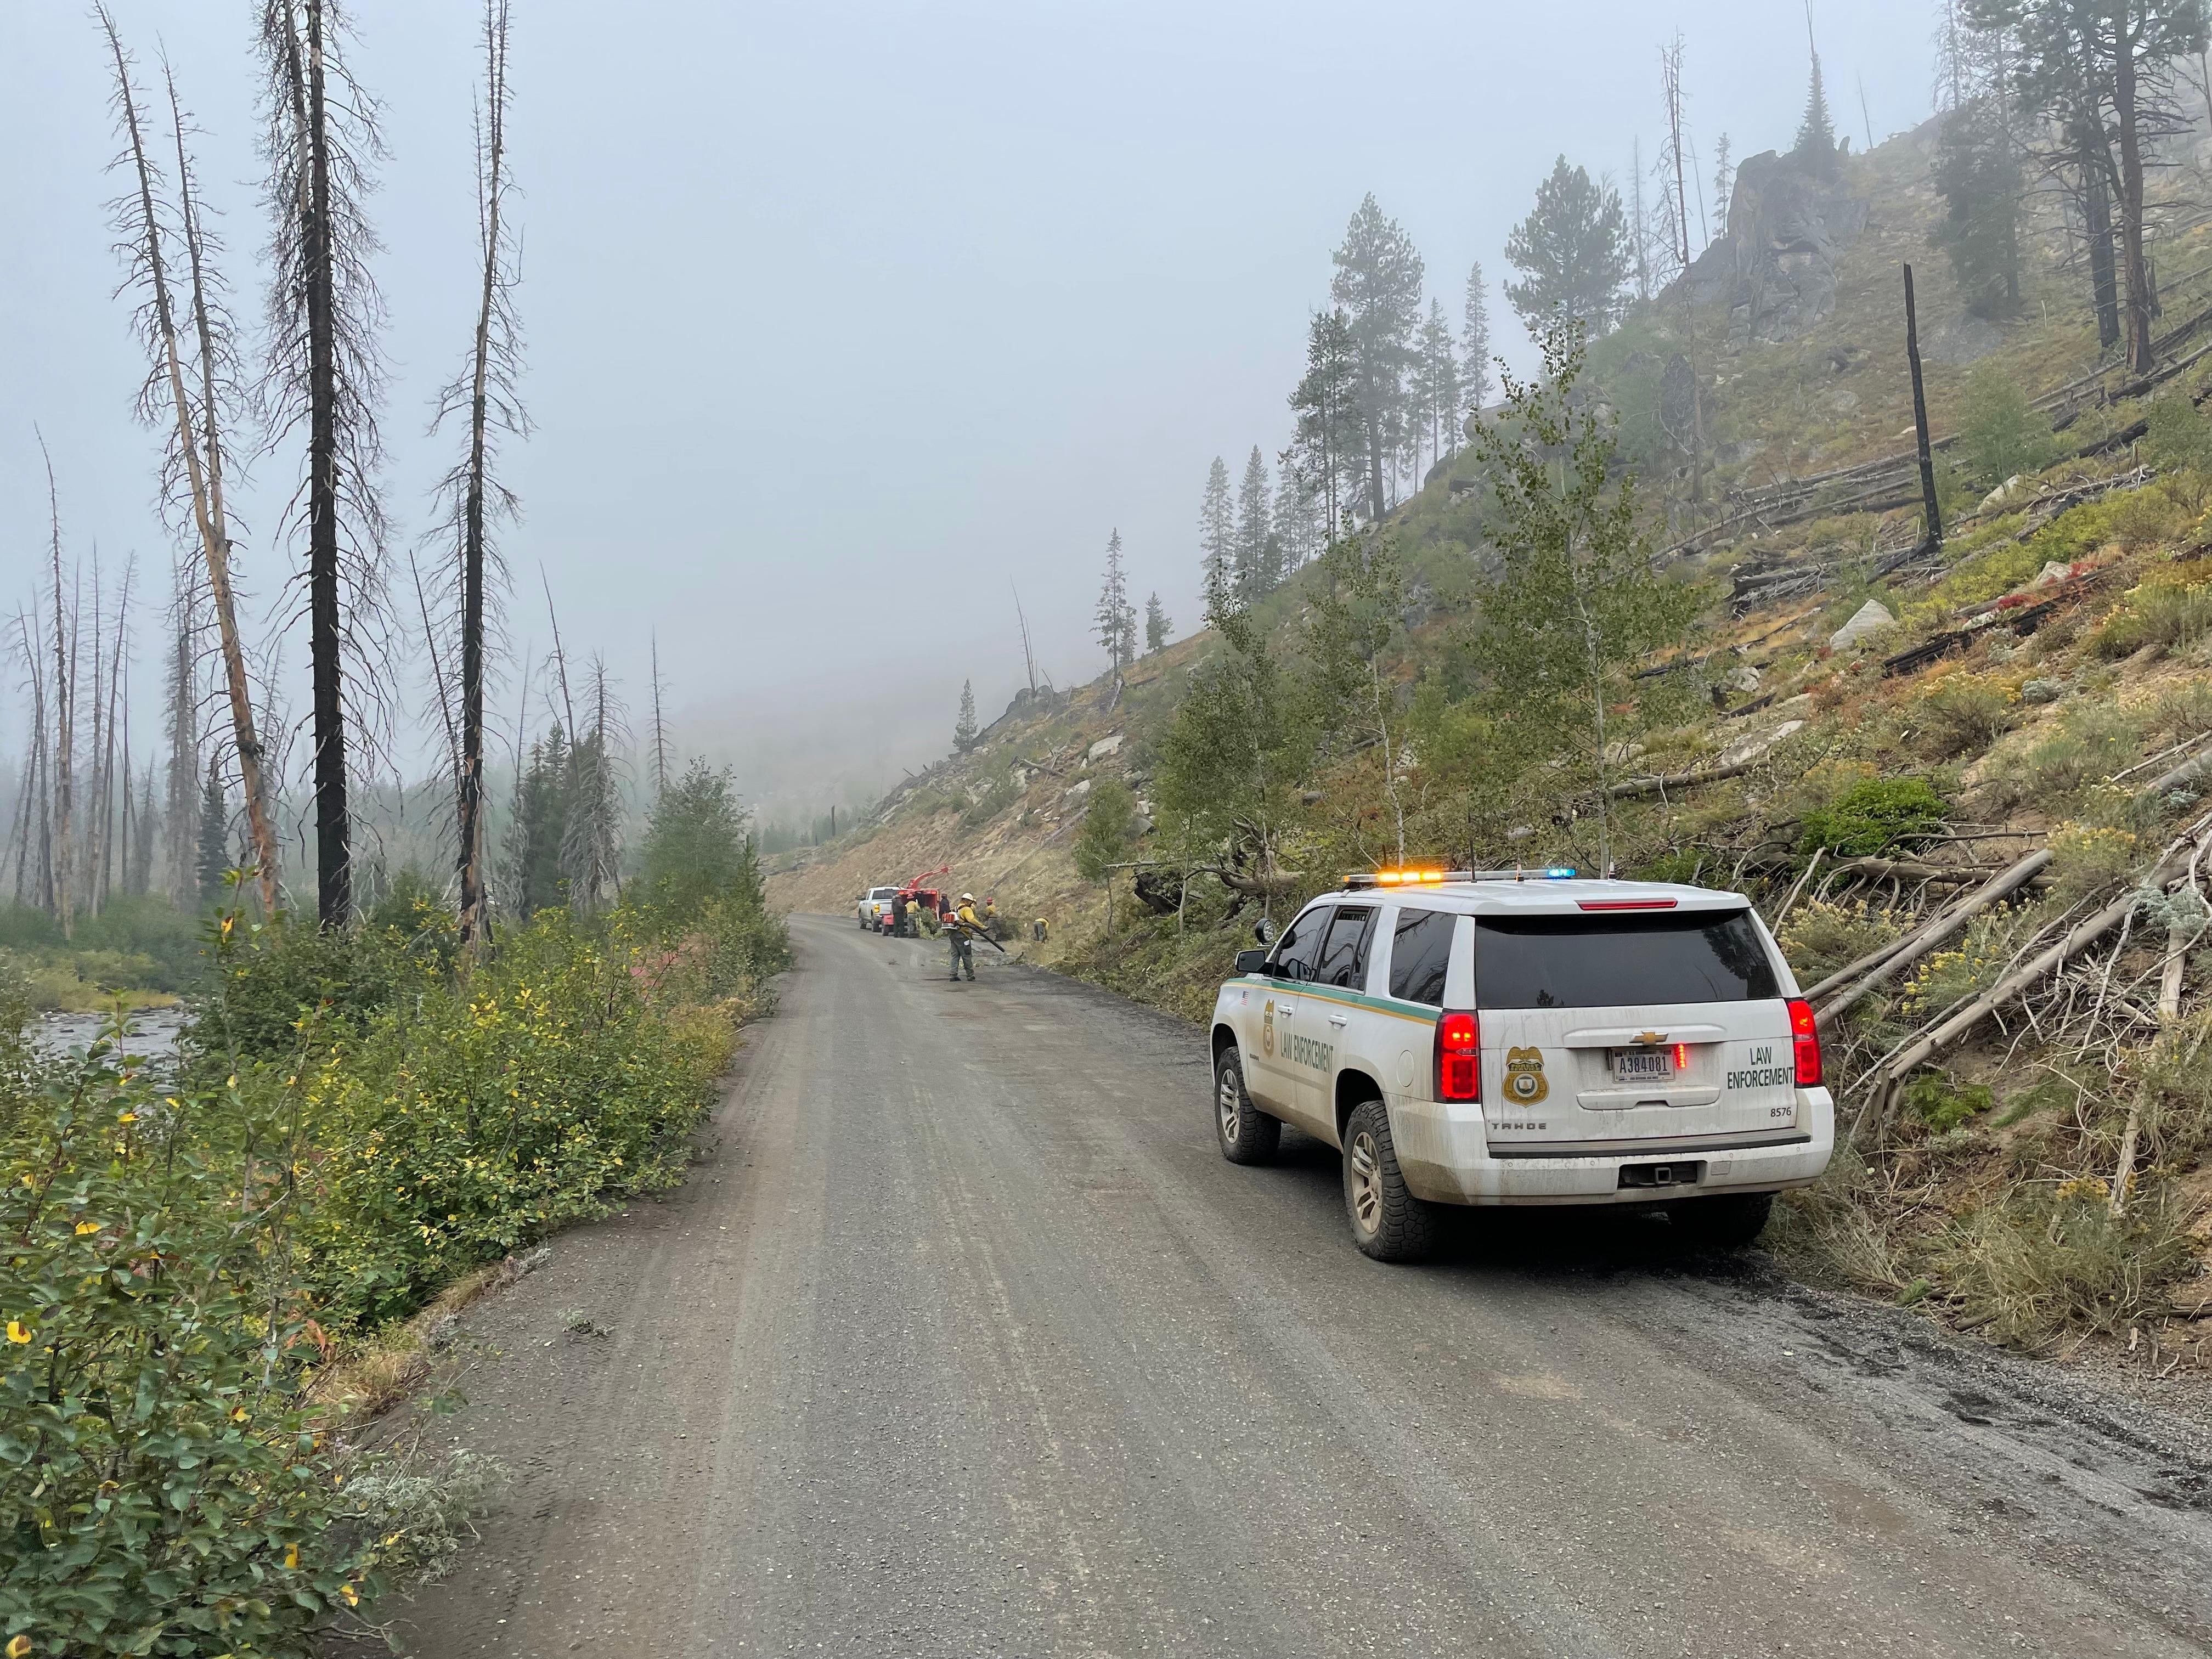 Incident Photo for the Tenmile Fire